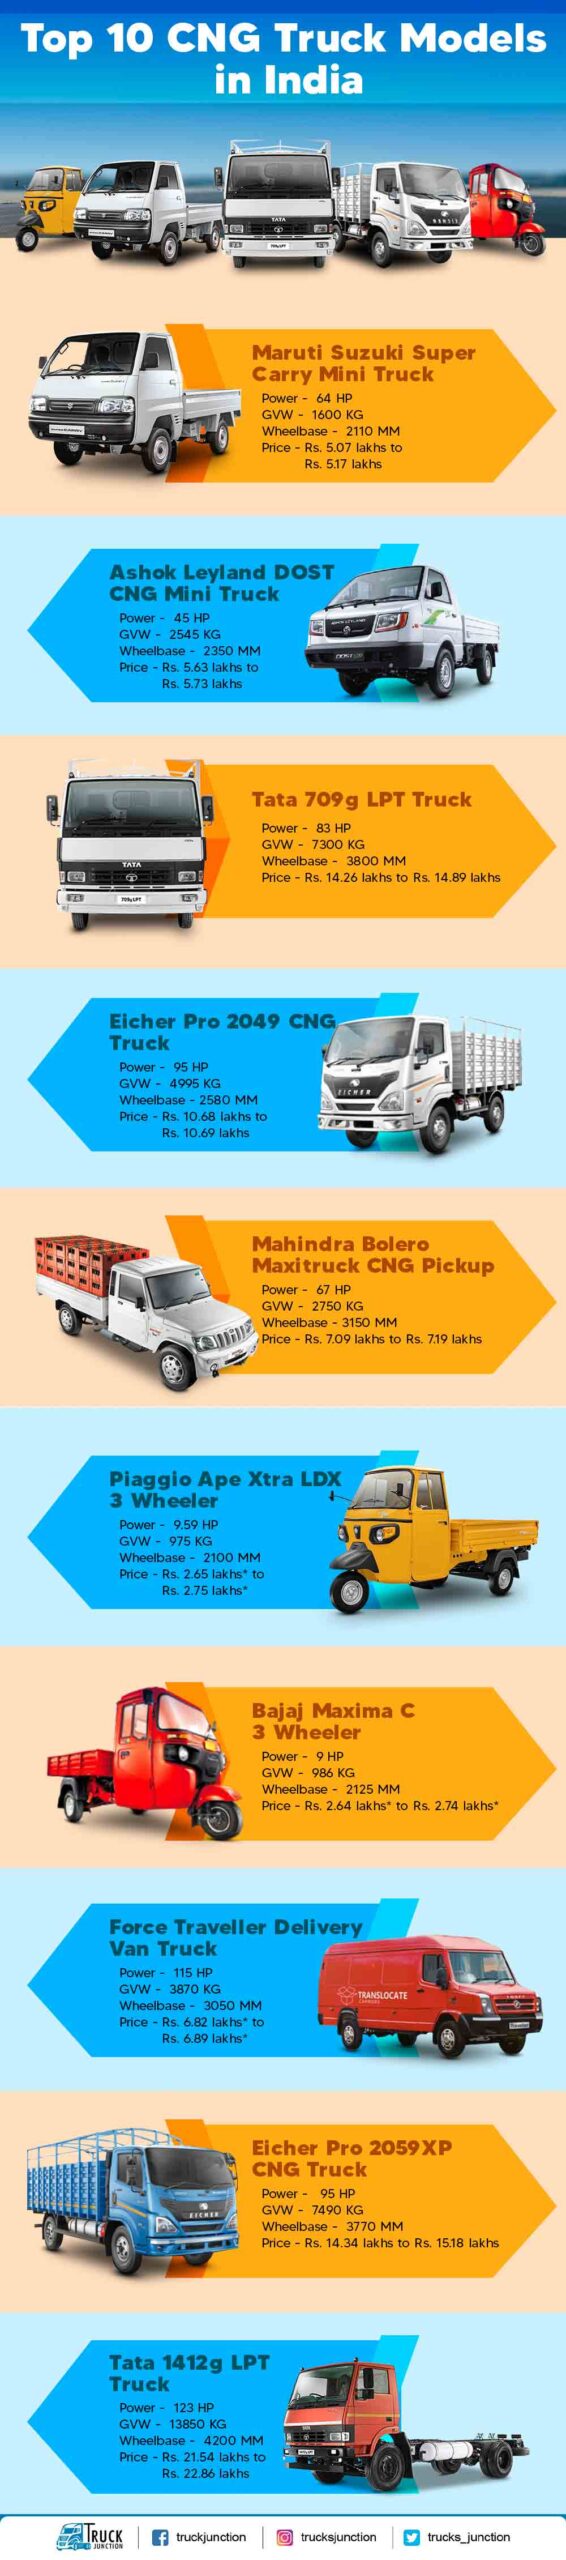 Top 10 CNG Truck Models infographic